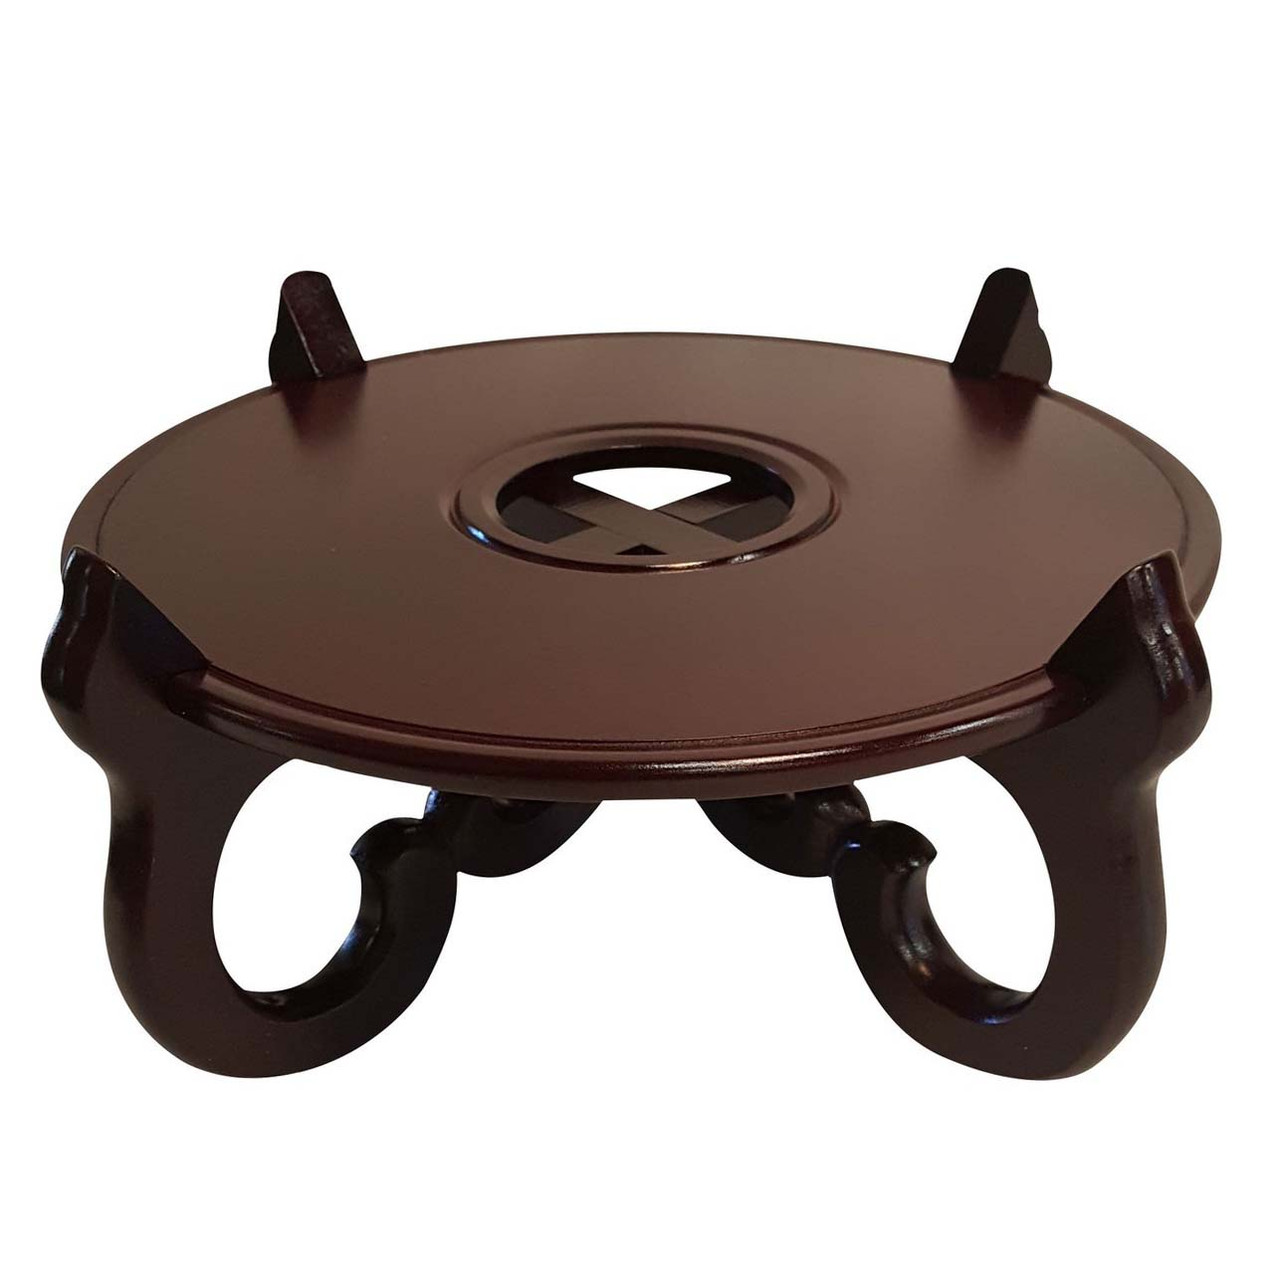 Plate Stand in Asian Mahogany for Porcelain Plates - Oriental Furniture  Warehouse: Chinese & Asian Styles